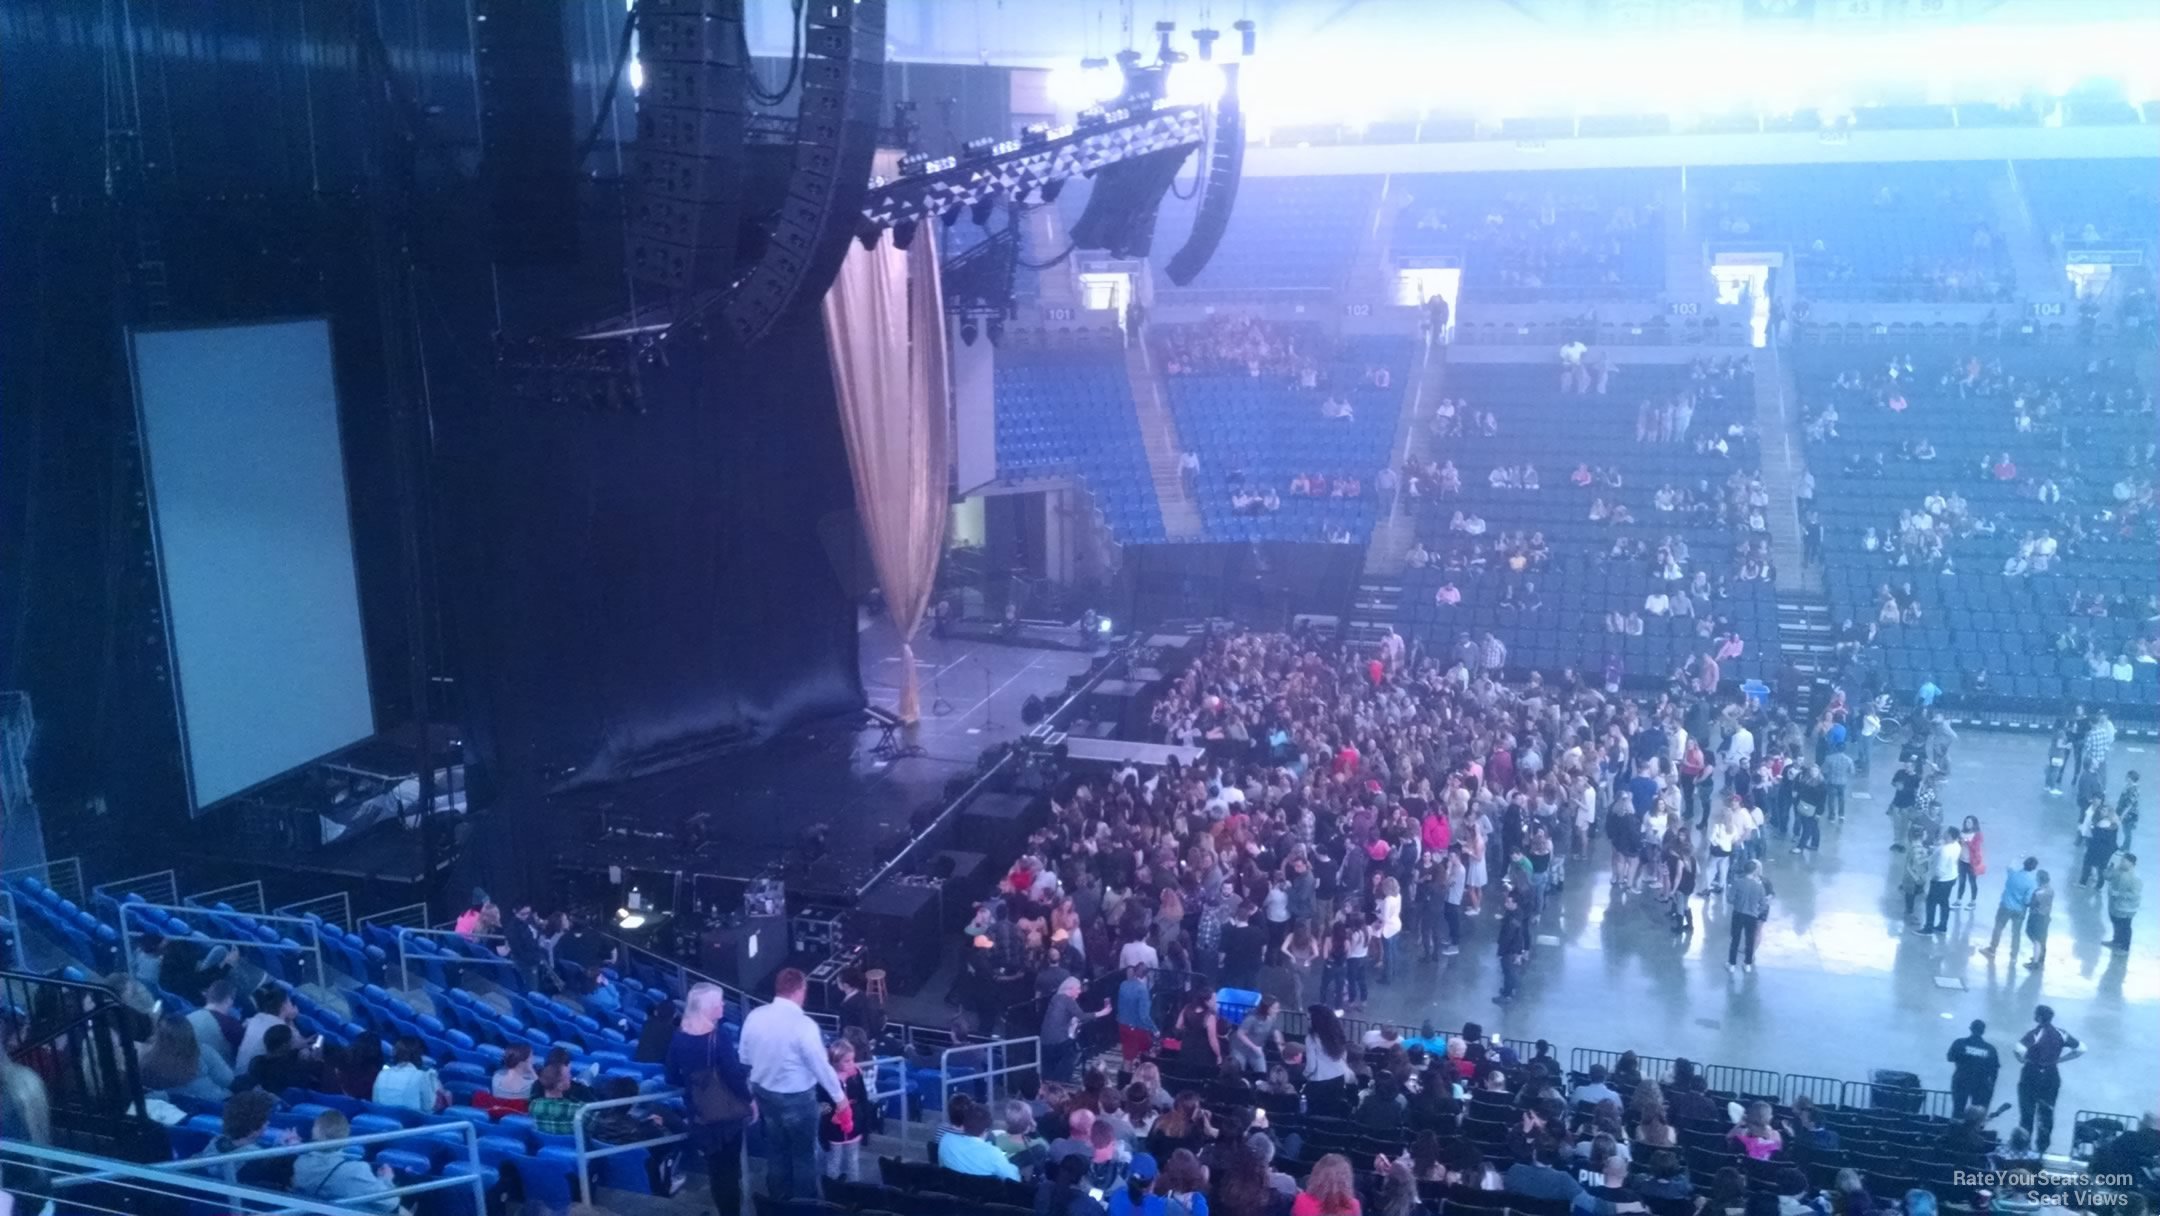 section 215, row d seat view  for concert - chaifetz arena